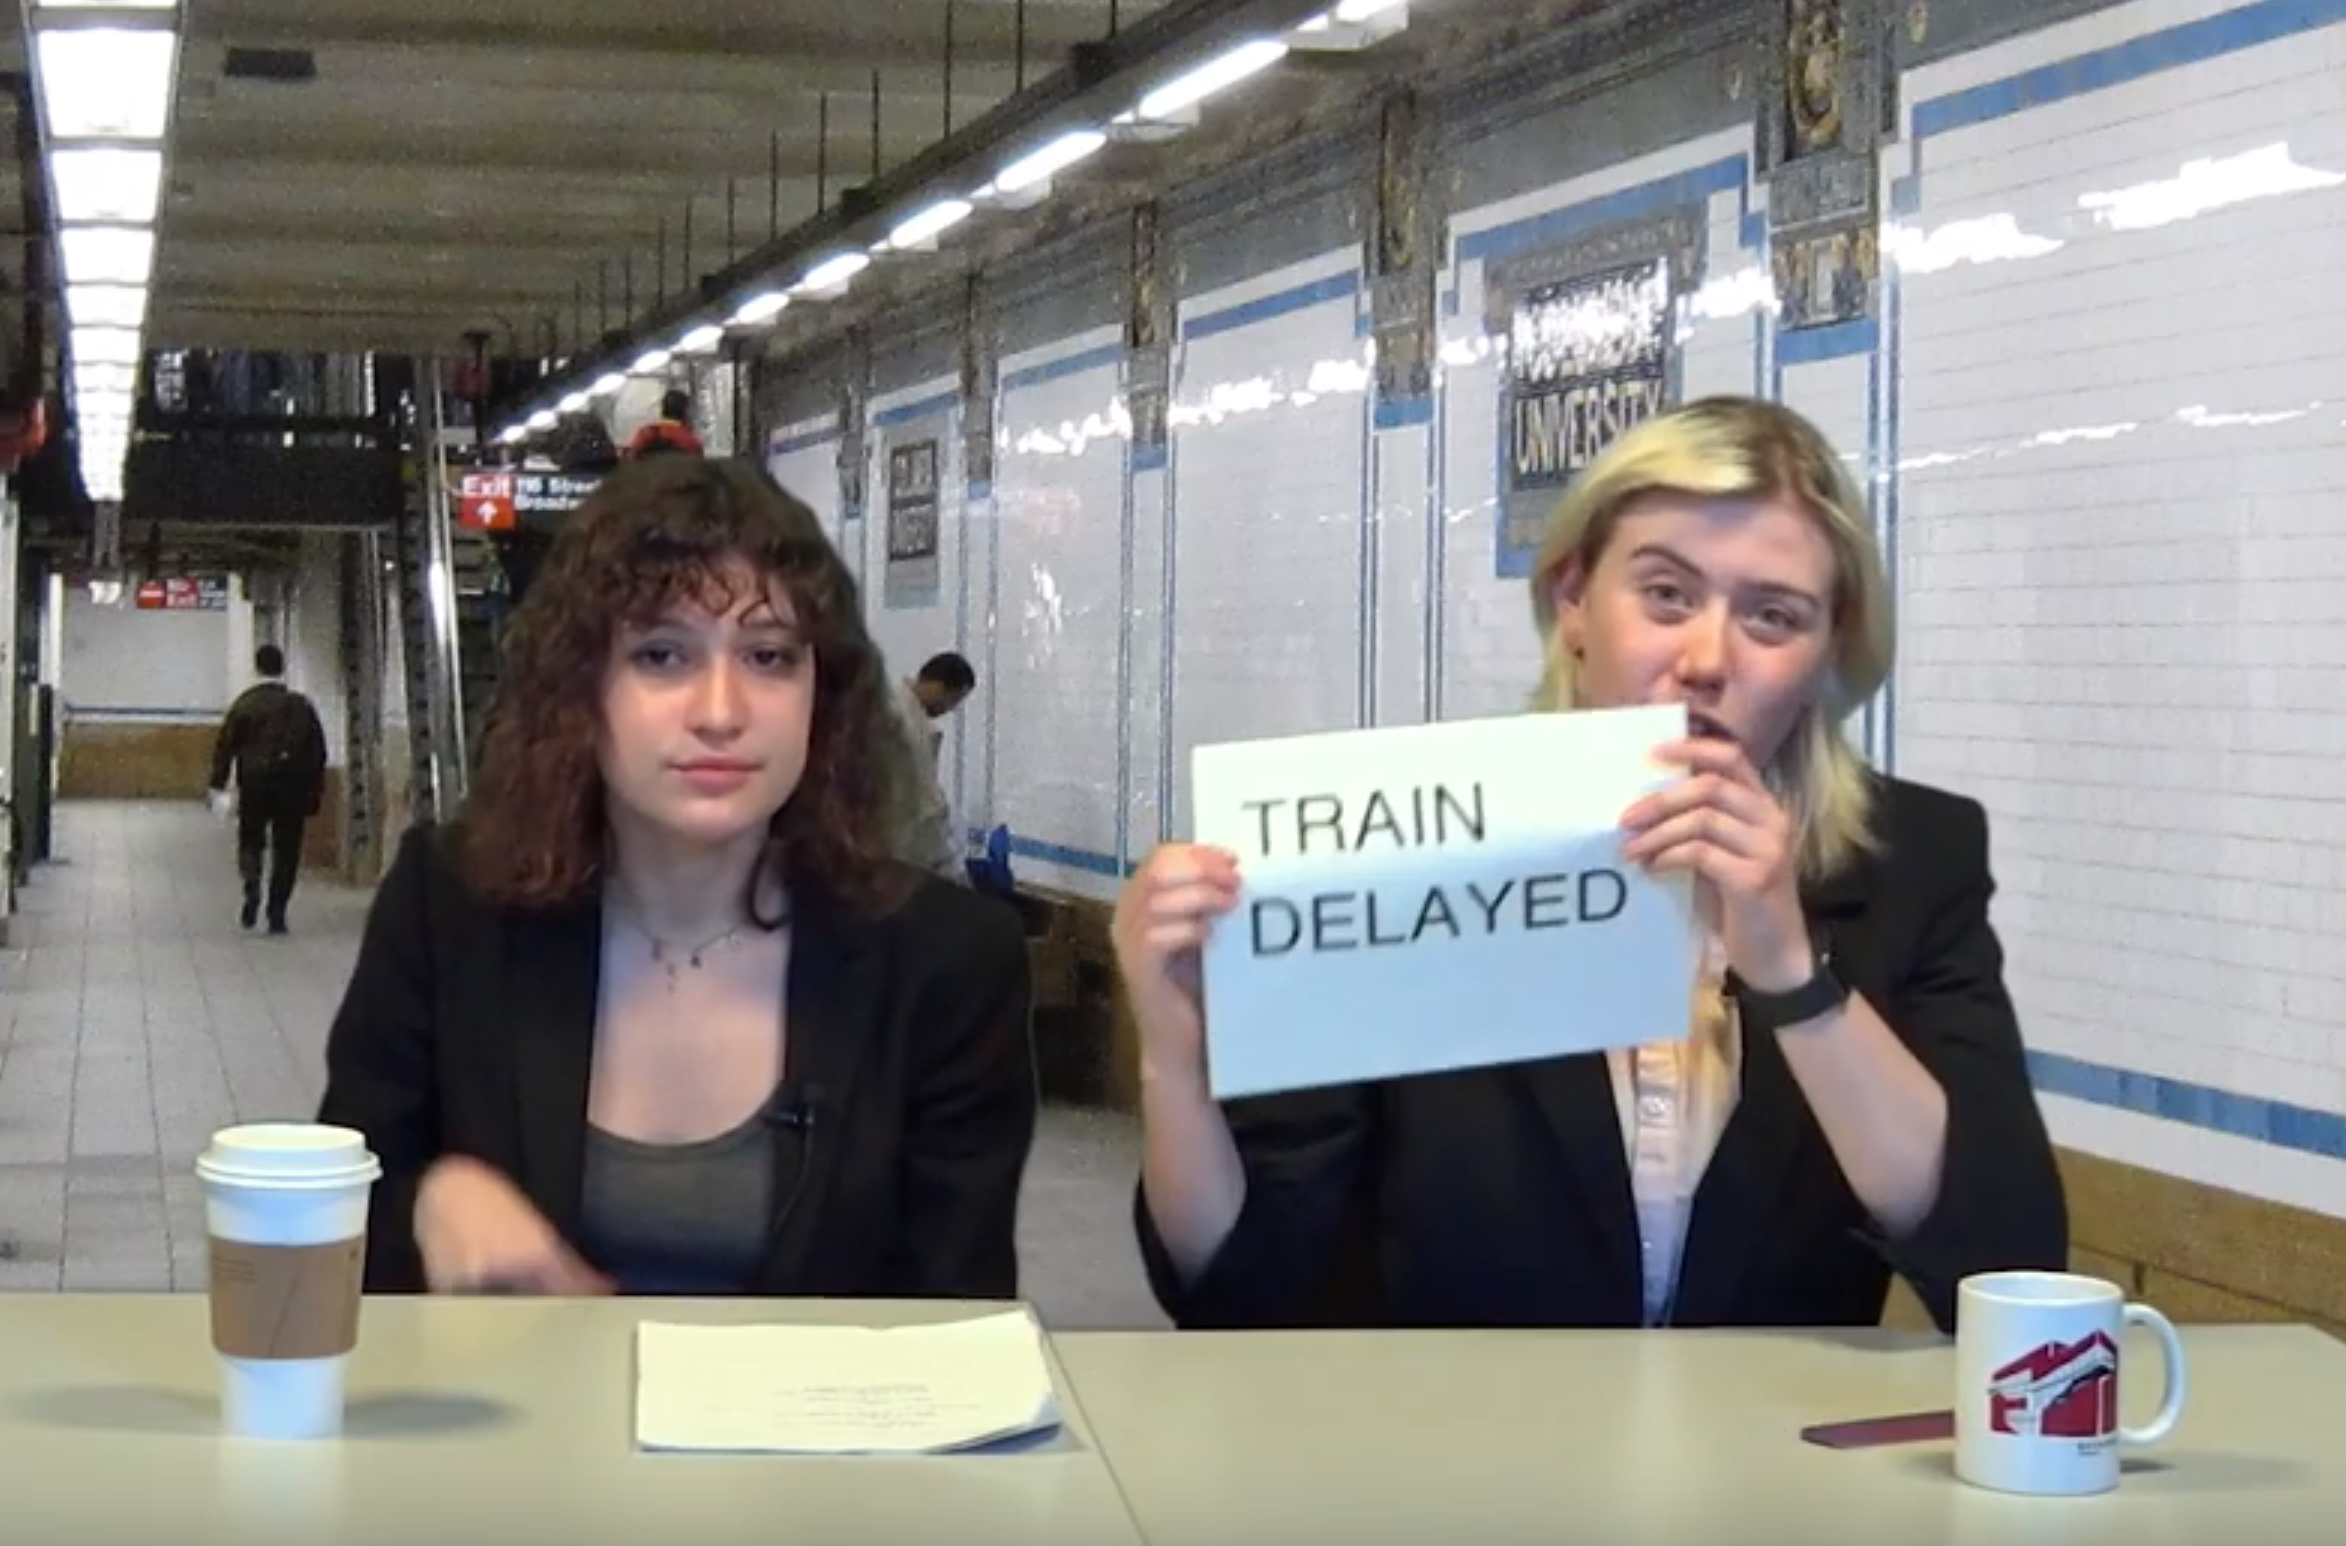 Students sitting at desk at Columbia subway station; one is holding a sign that says 'train delayed'